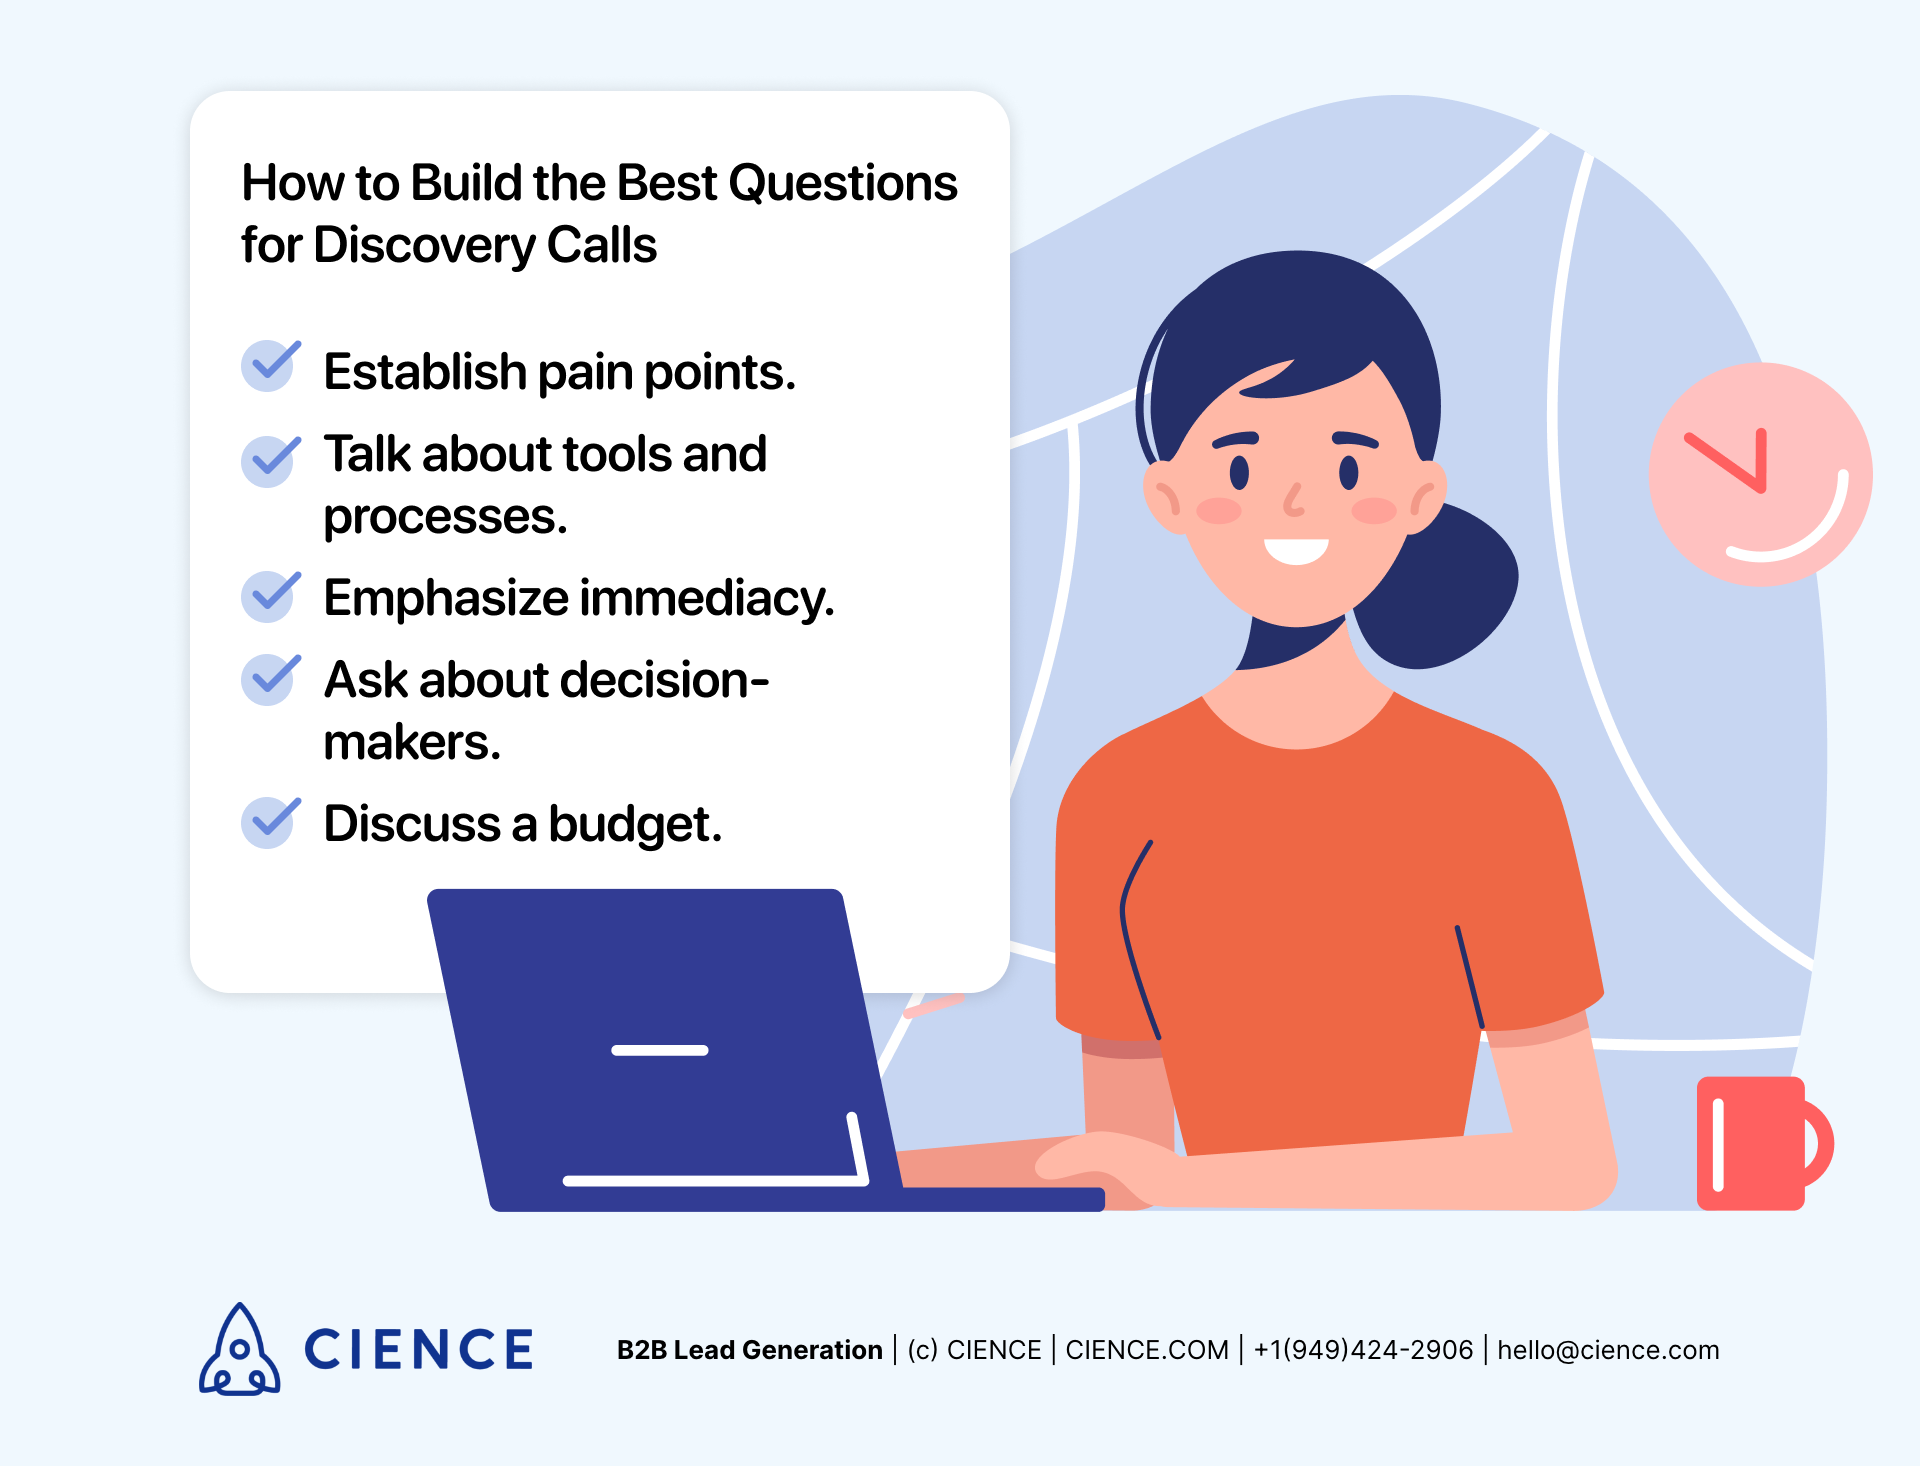 How to Build the Best Discovery Call Questions